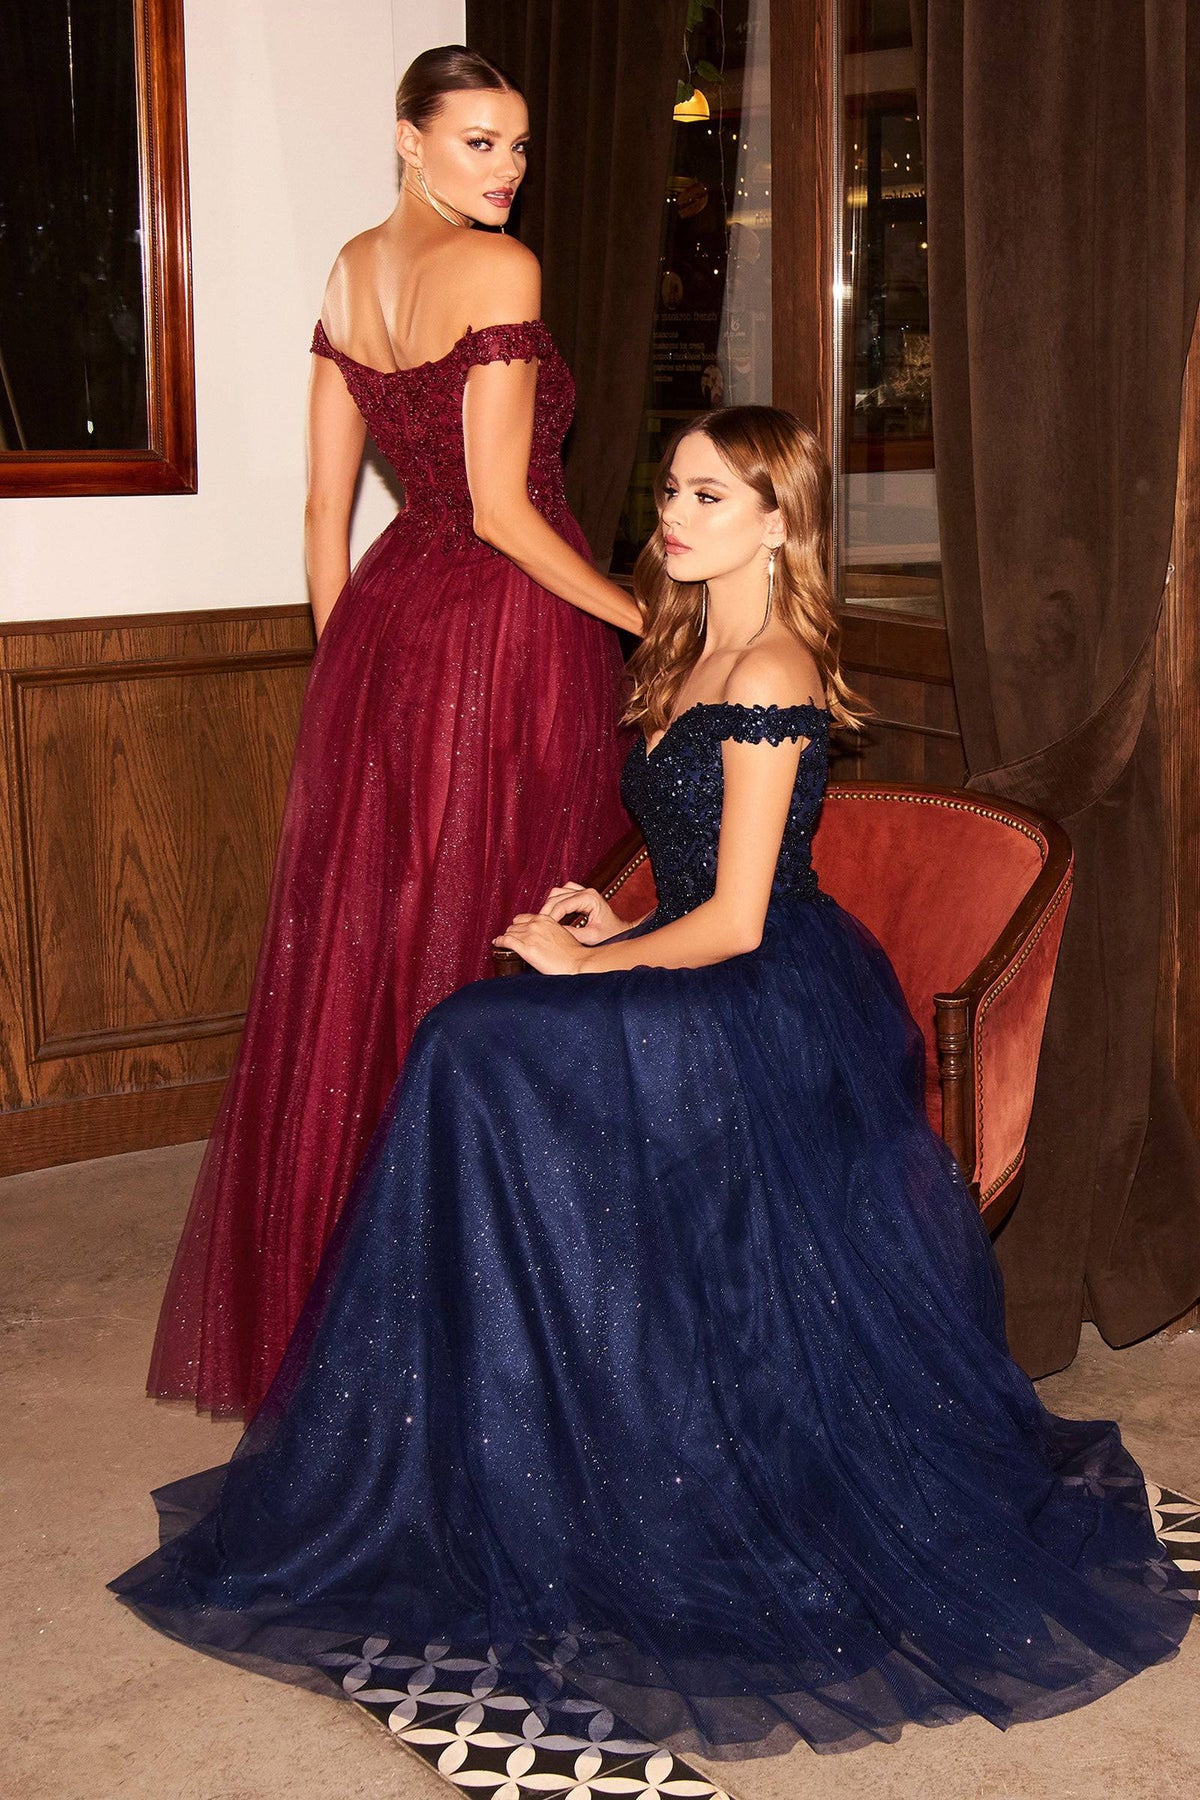 Jawdropping Princess Ball Gown with Glitter Bodice and Layered Skirt #CDCD0177 - NORMA REED